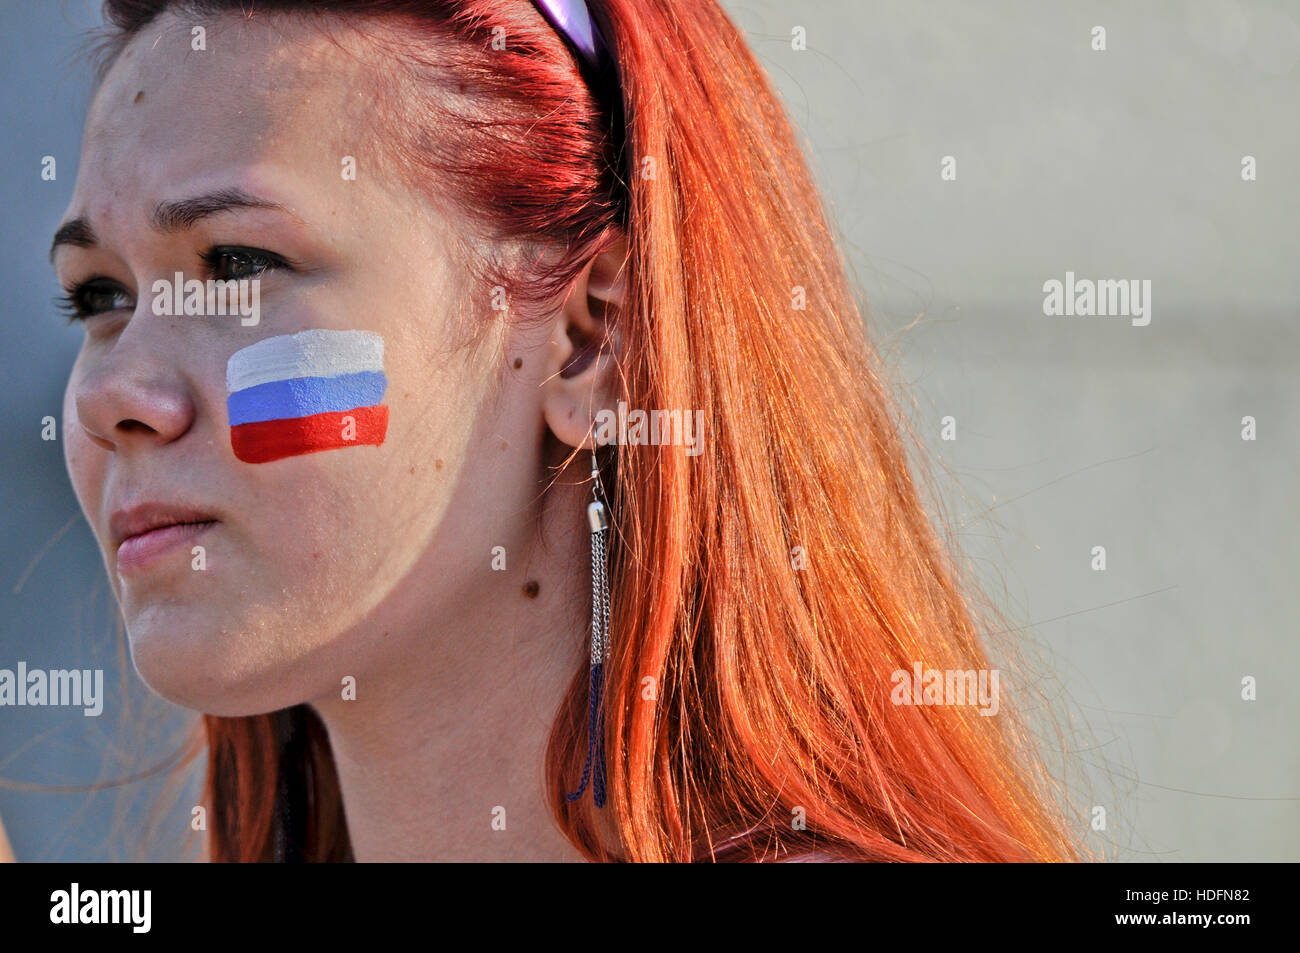 Russian sports fan (woman) with her face painted with the Russian flag Stock Photo